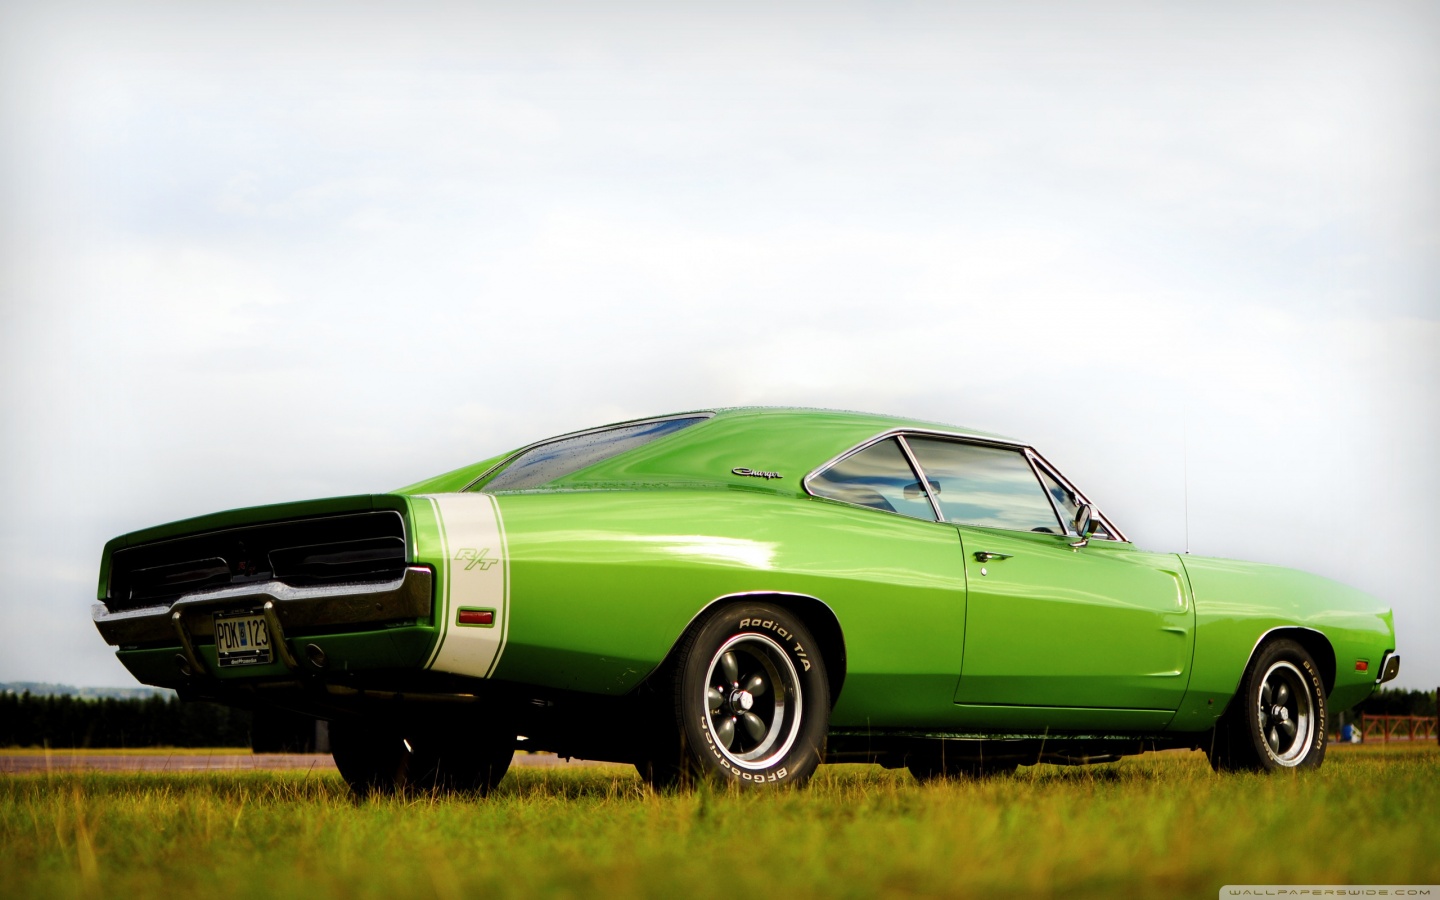 Dodge Charger RT 1968 wallpaperswide com dodge_charger_rt-wallpaper-1440x900